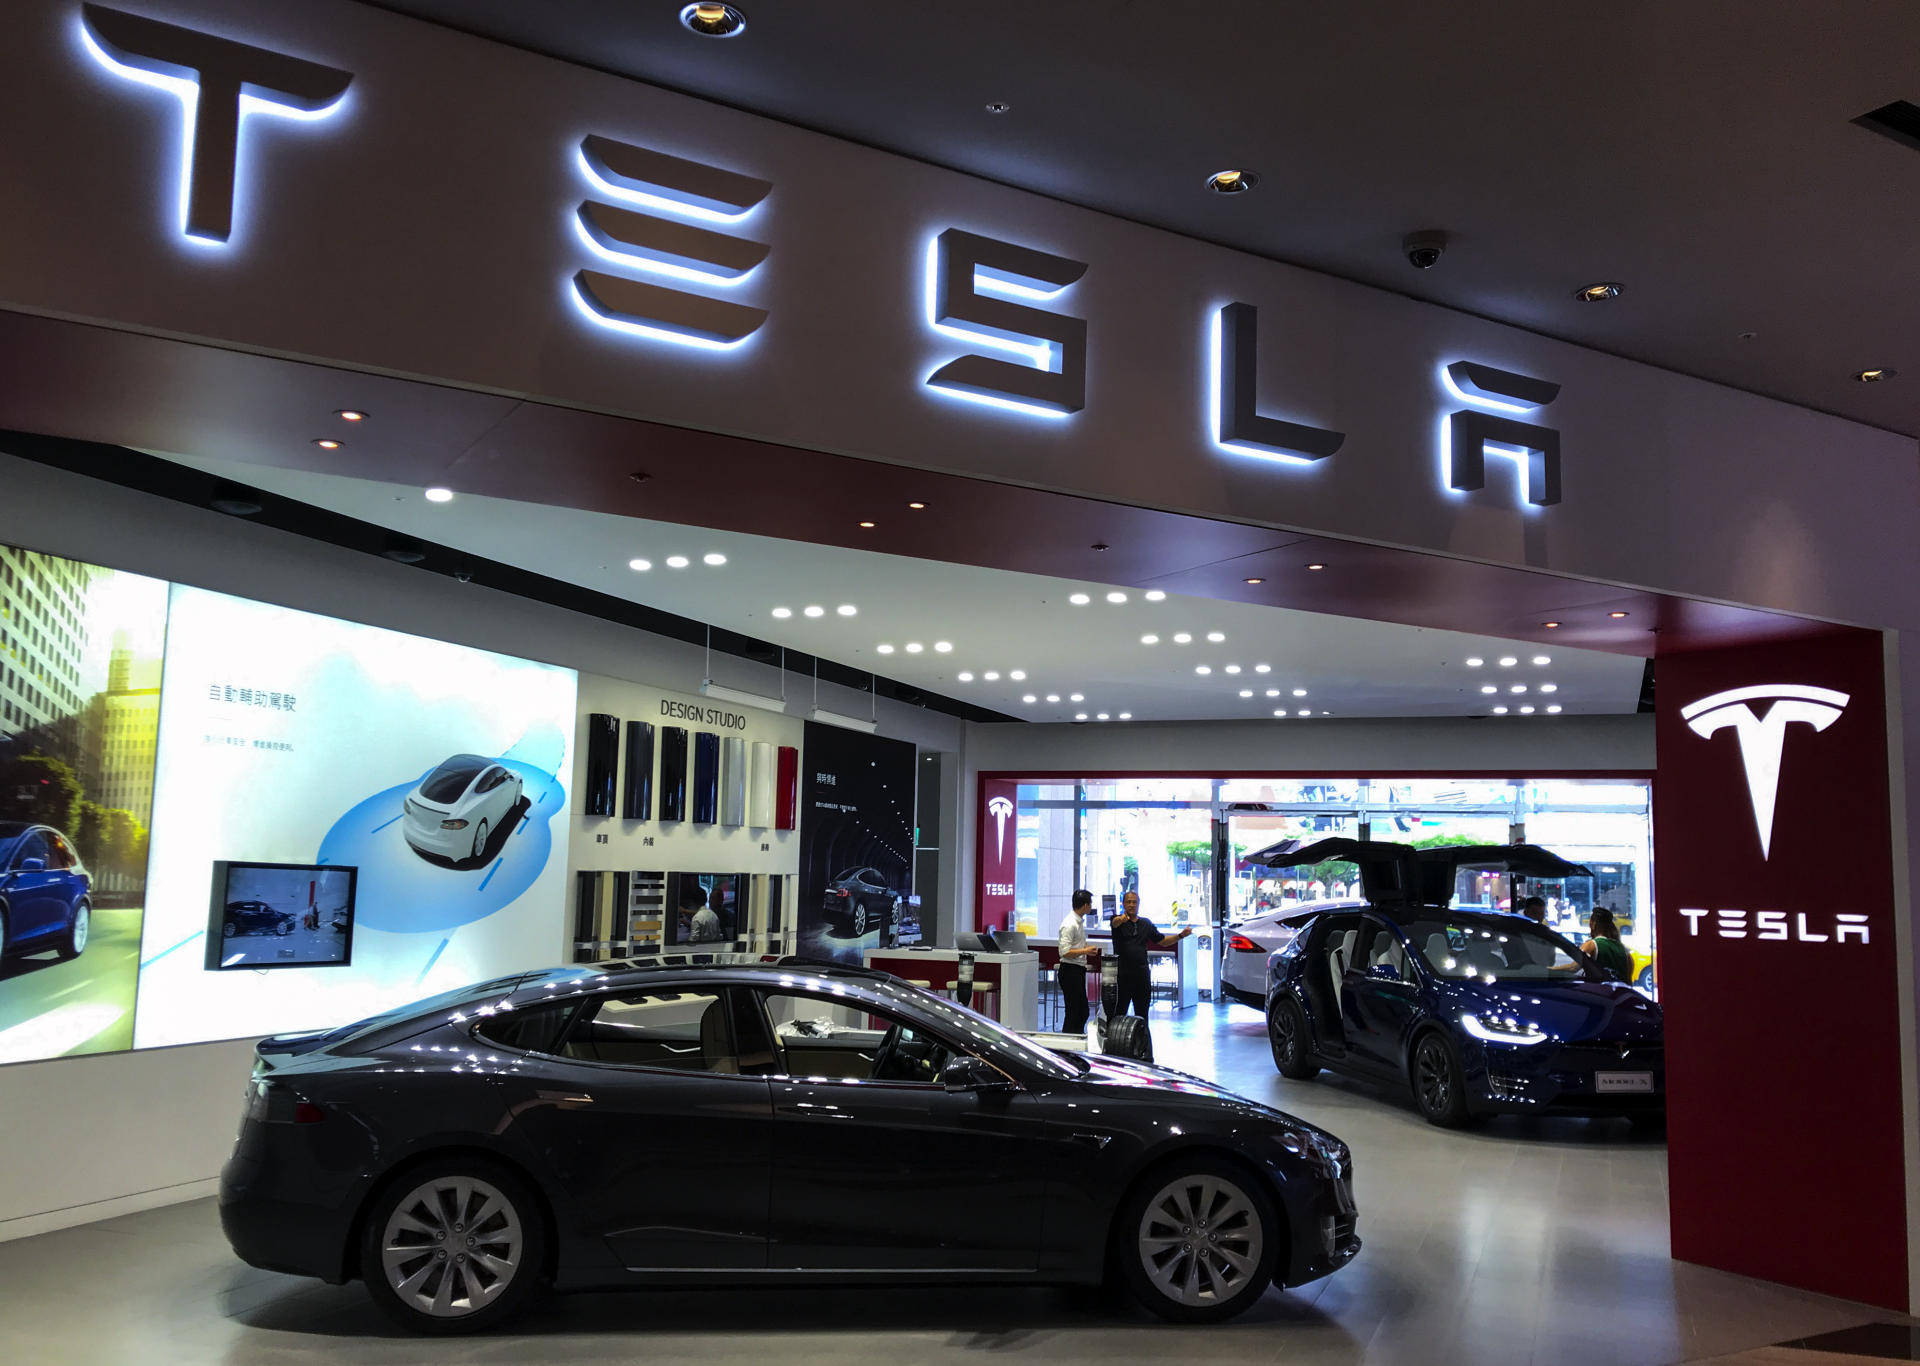 Musk Wants to Open Tesla Store in His South African Hom...